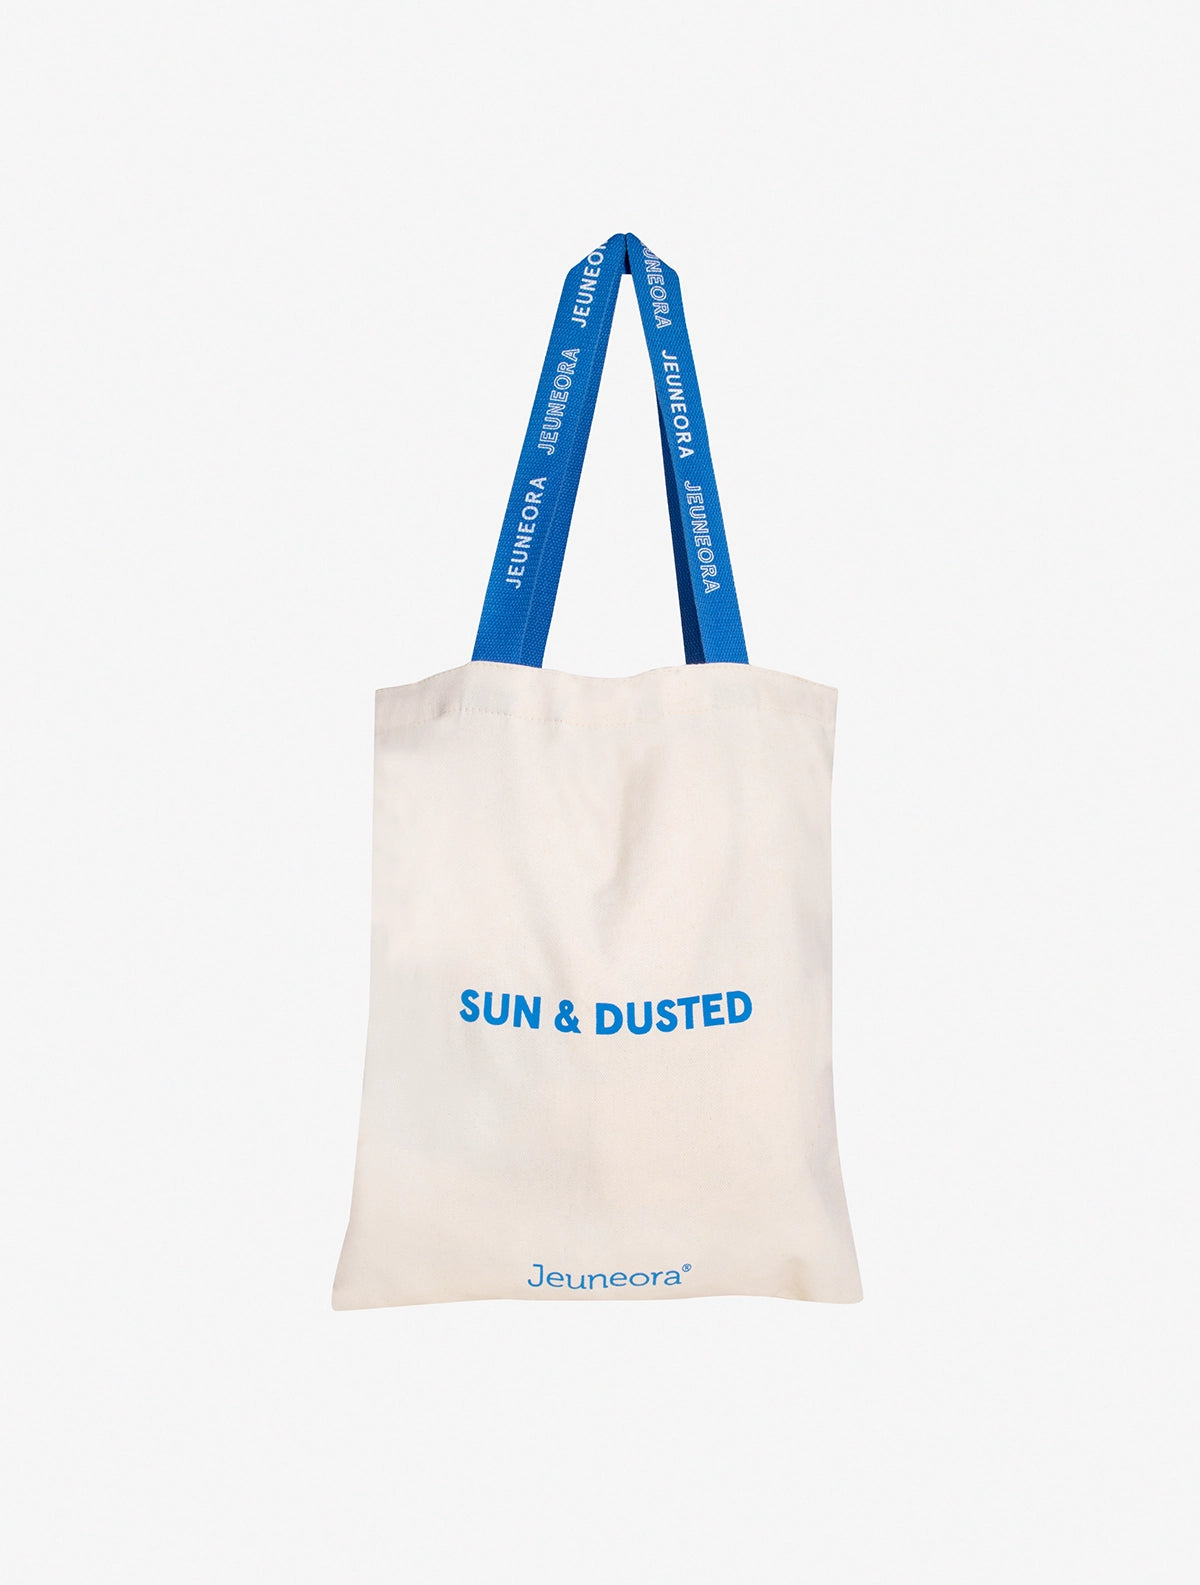 Jeuneora summer tote bag with sun and dusted logo